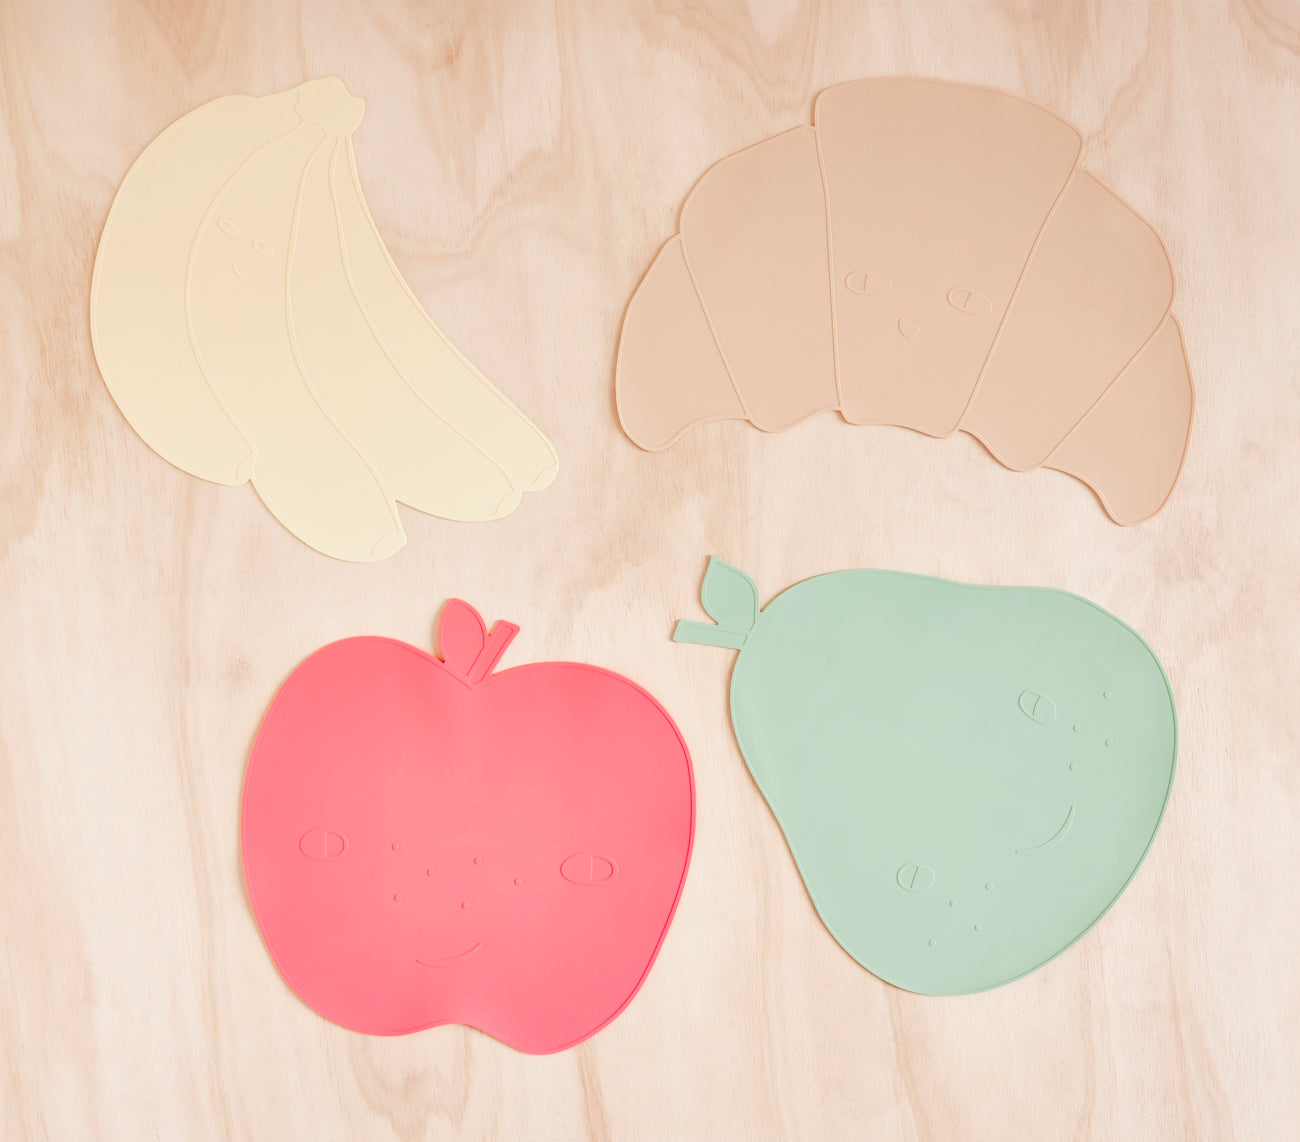 Placemat Pear